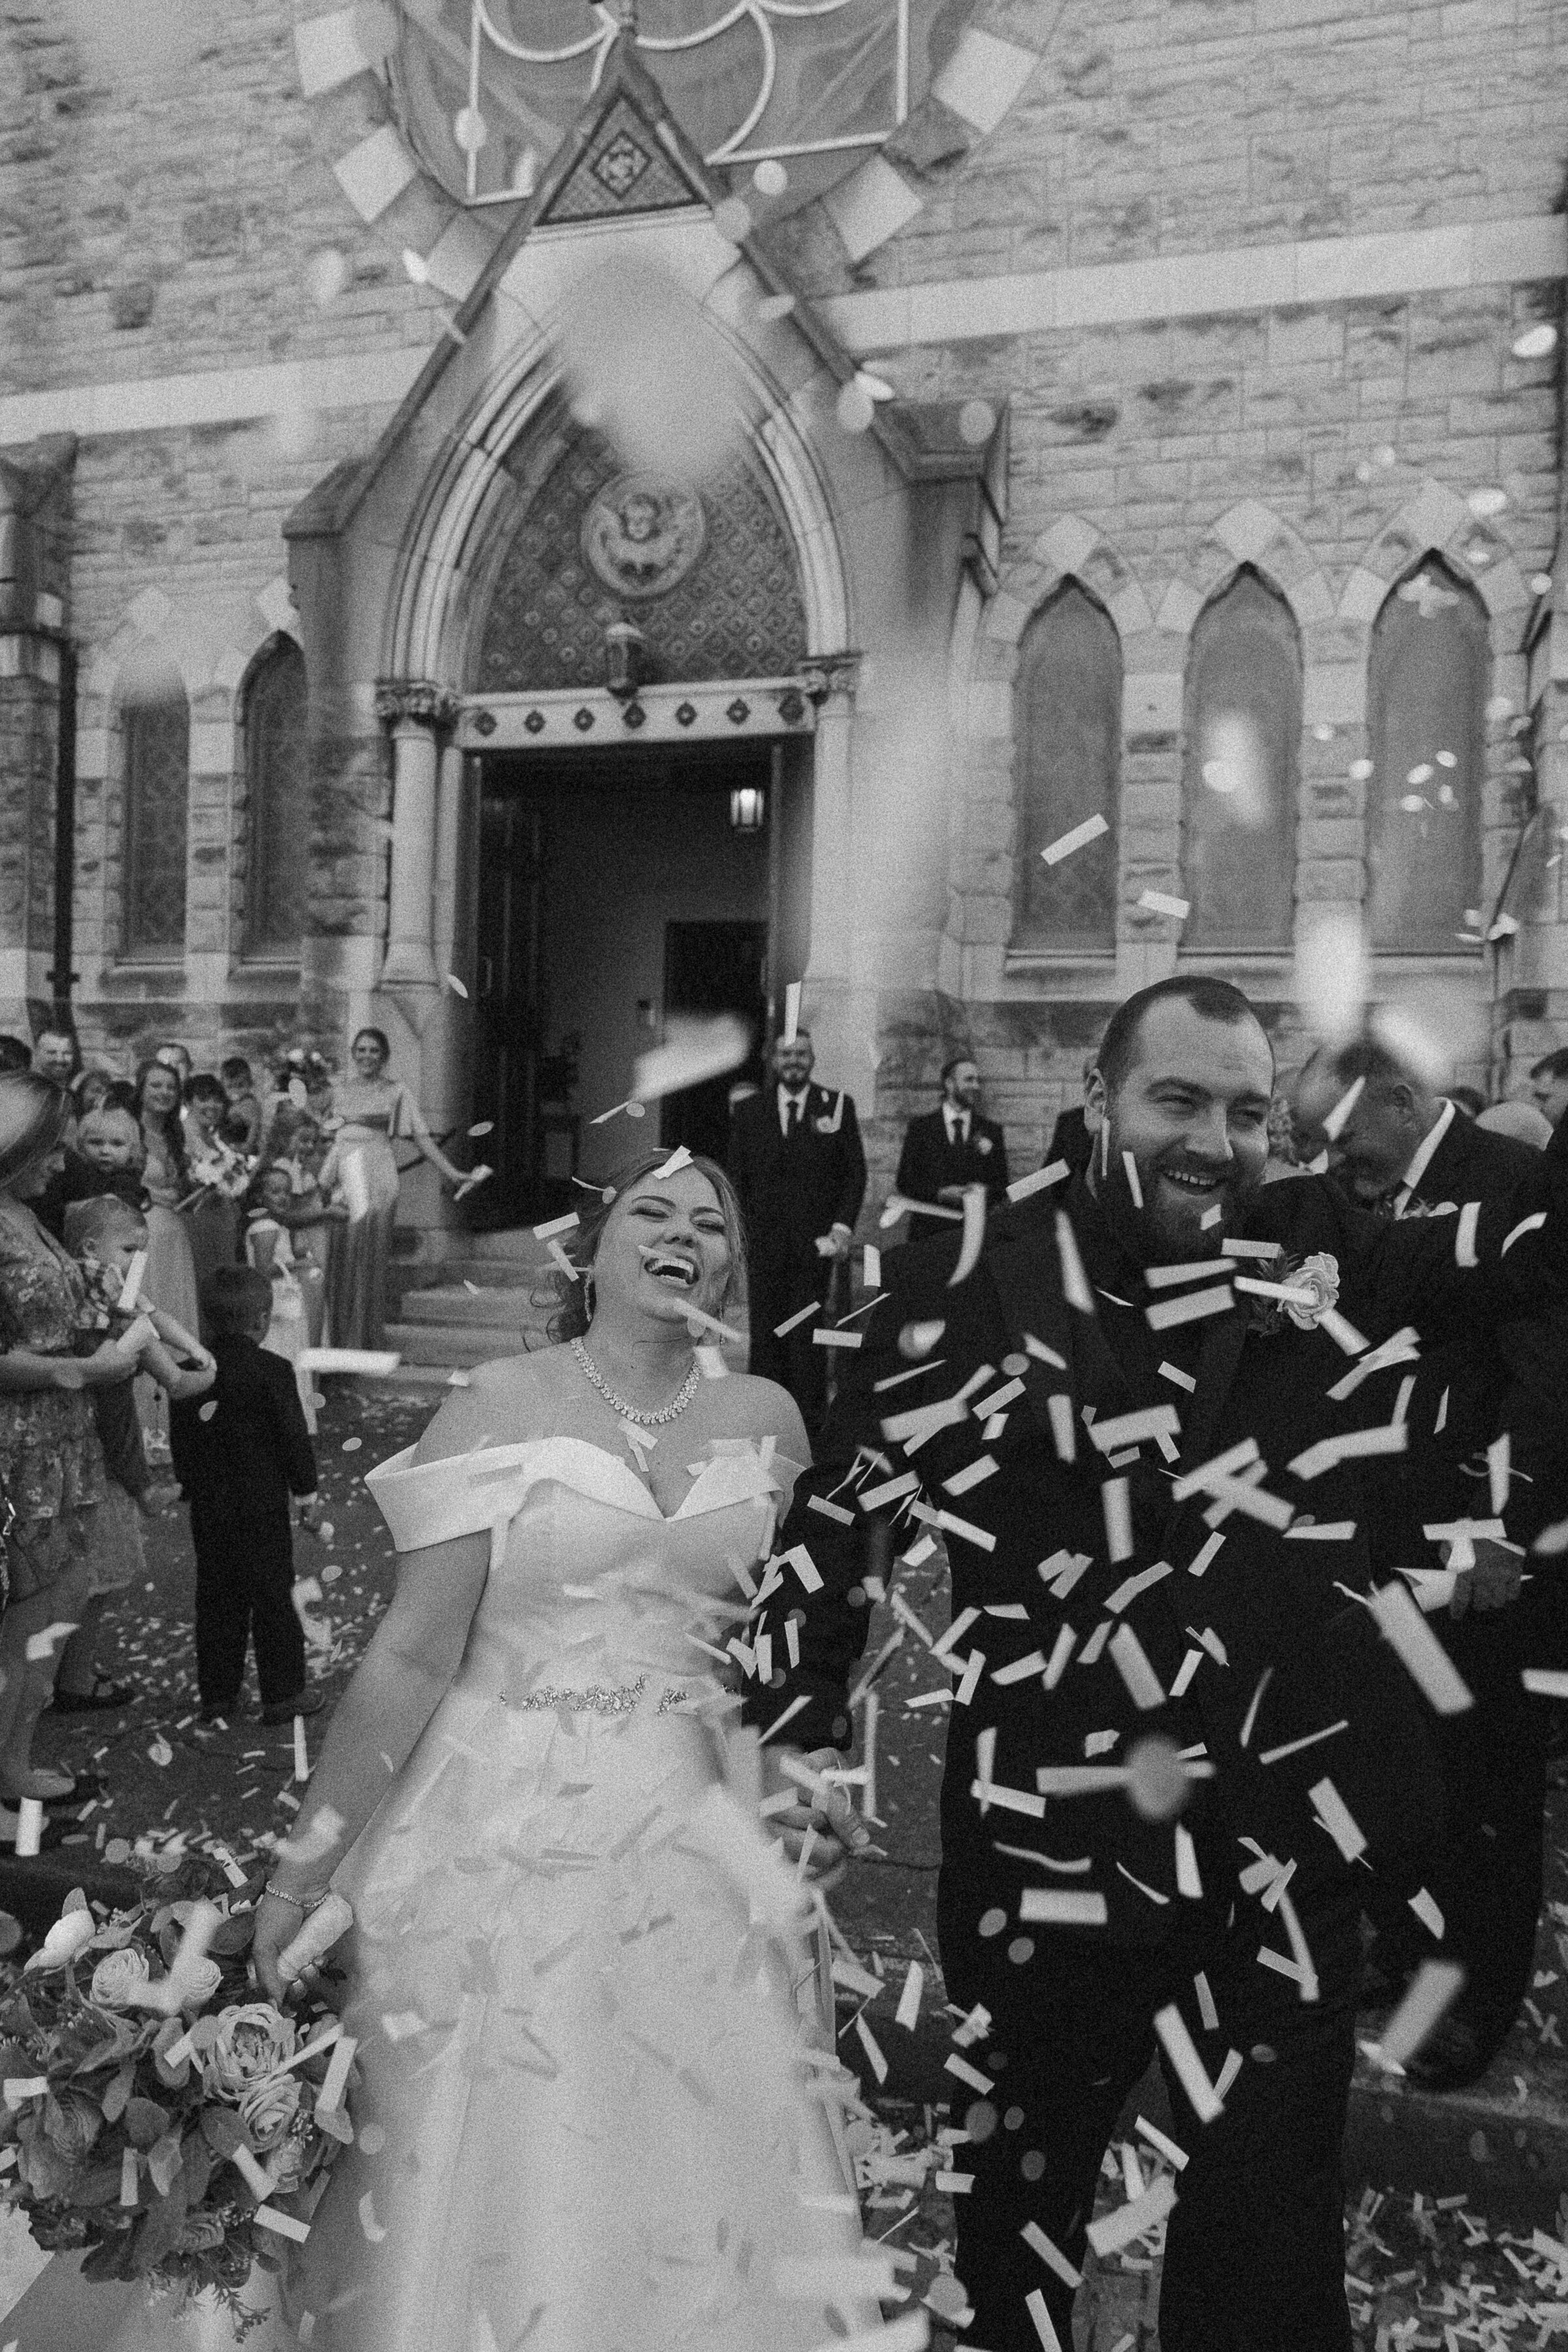 Newlyweds exiting the church amidst a shower of confetti.